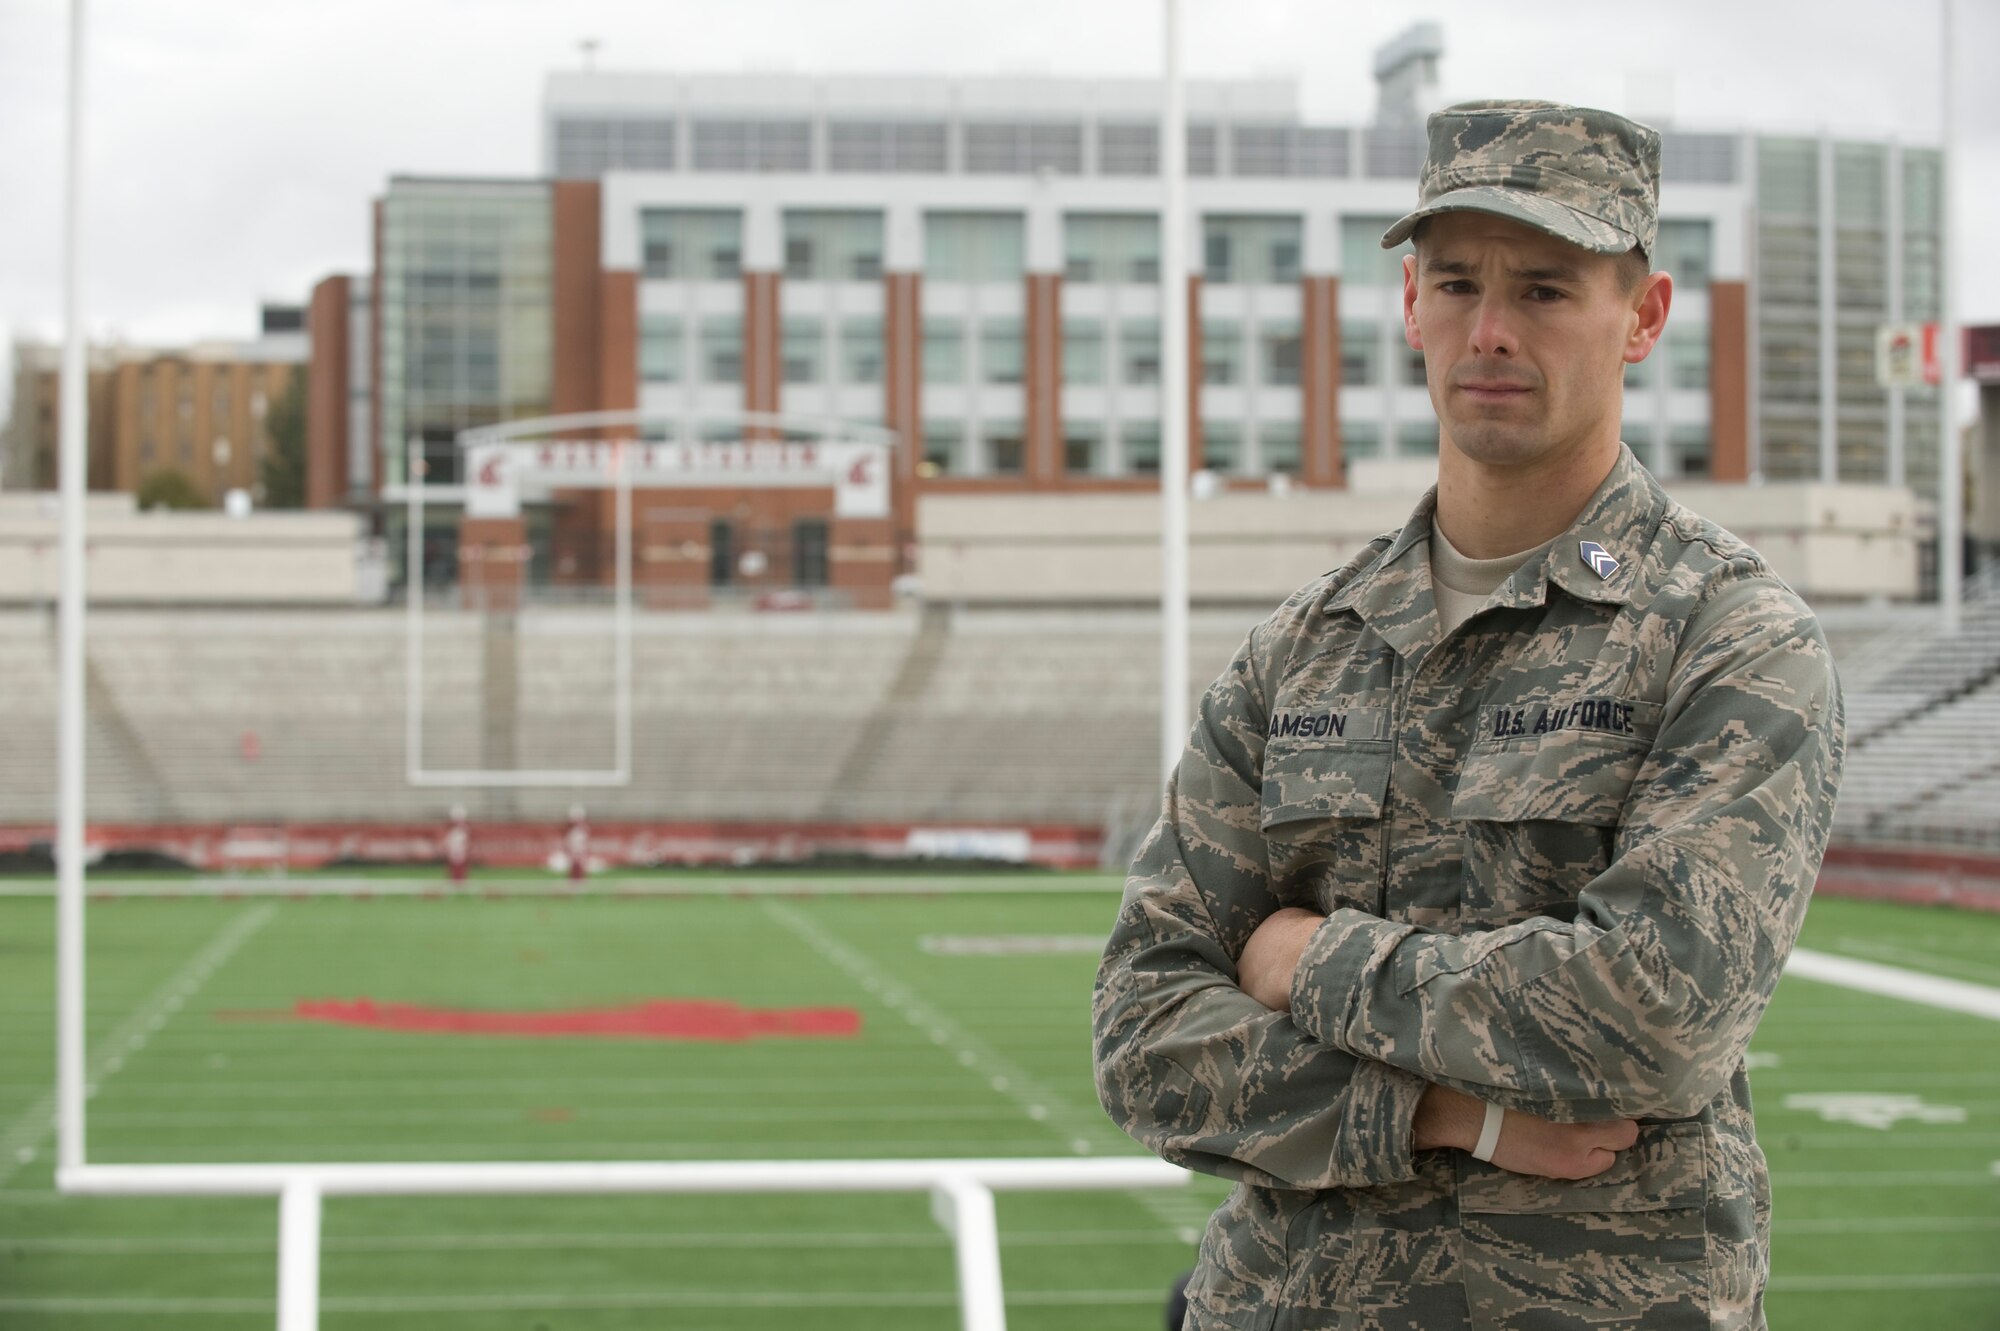 Former Fairchild Airman, Cadet 3rd Class Manny Lamson plays football for the Washington State University Cougars. Lamson is also in the Air Force Reserve, 446th Operations Support Flight at Joint Base Lewis-McChord. (U.S. Air Force photo/Airman 1st Class Earlandez Young)